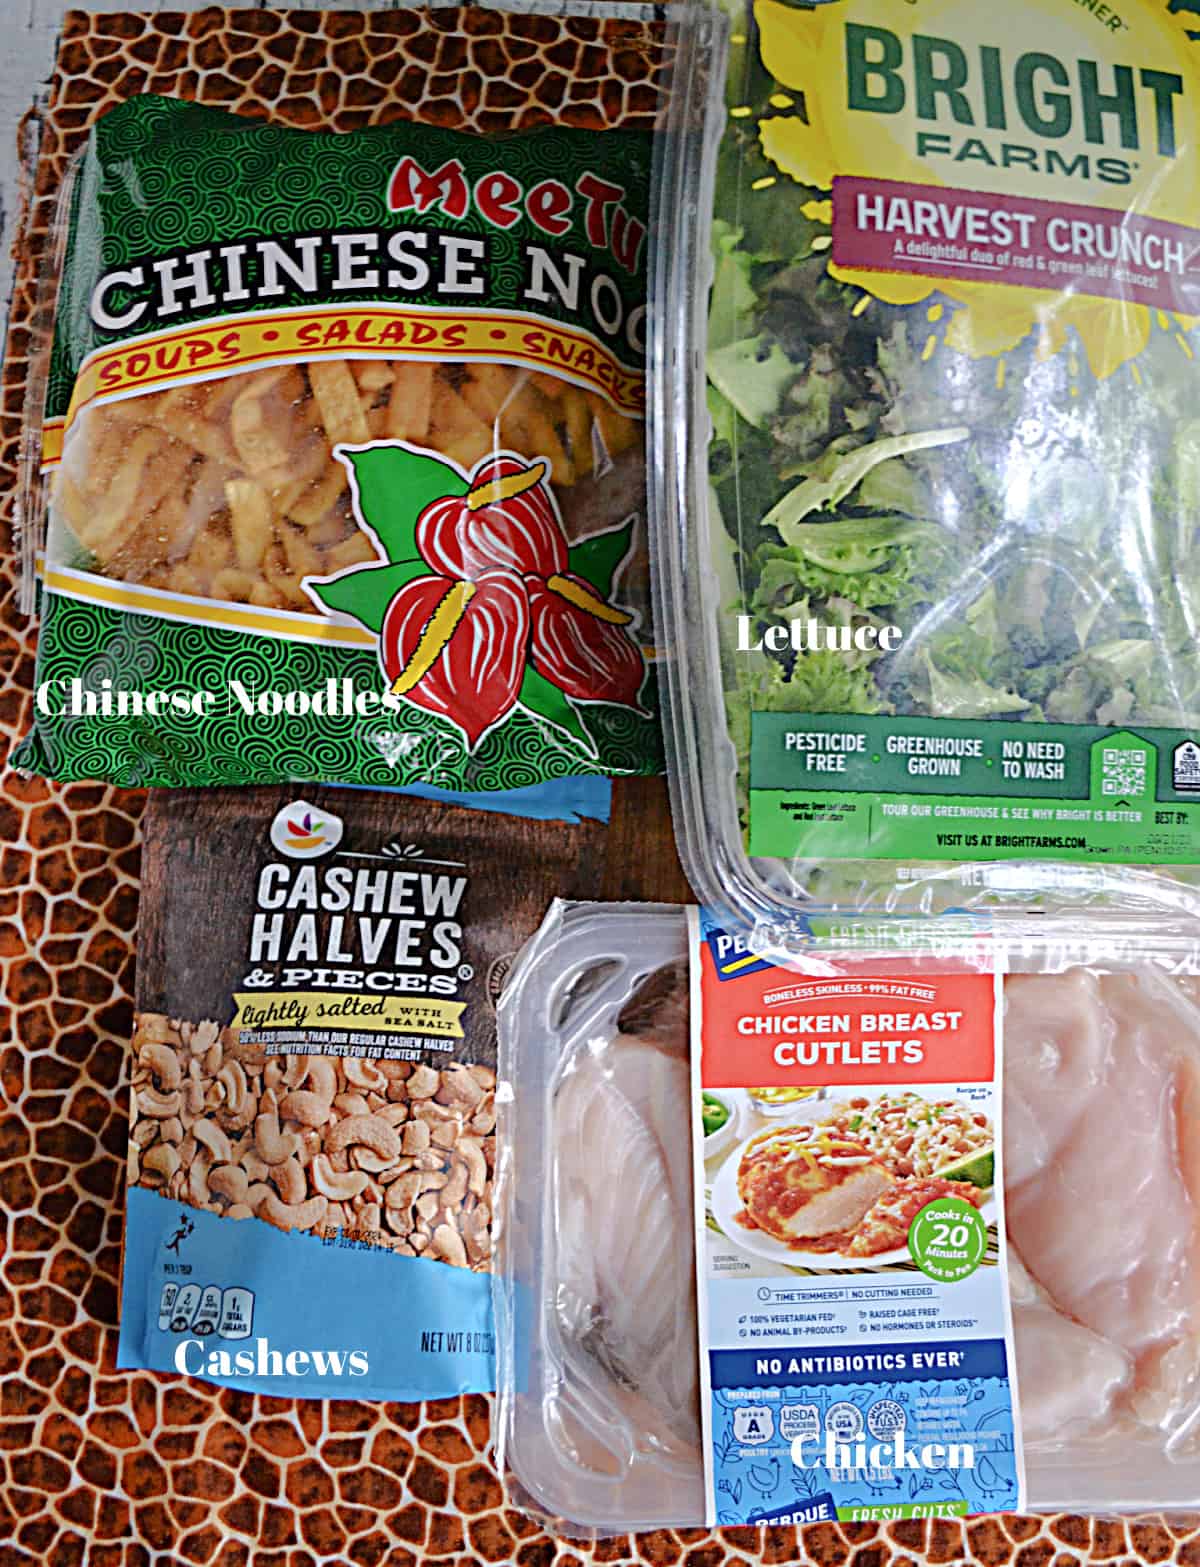 Asian crunchy noodles, a bag of salad mix, a package of chicken, and a bag of cashews.